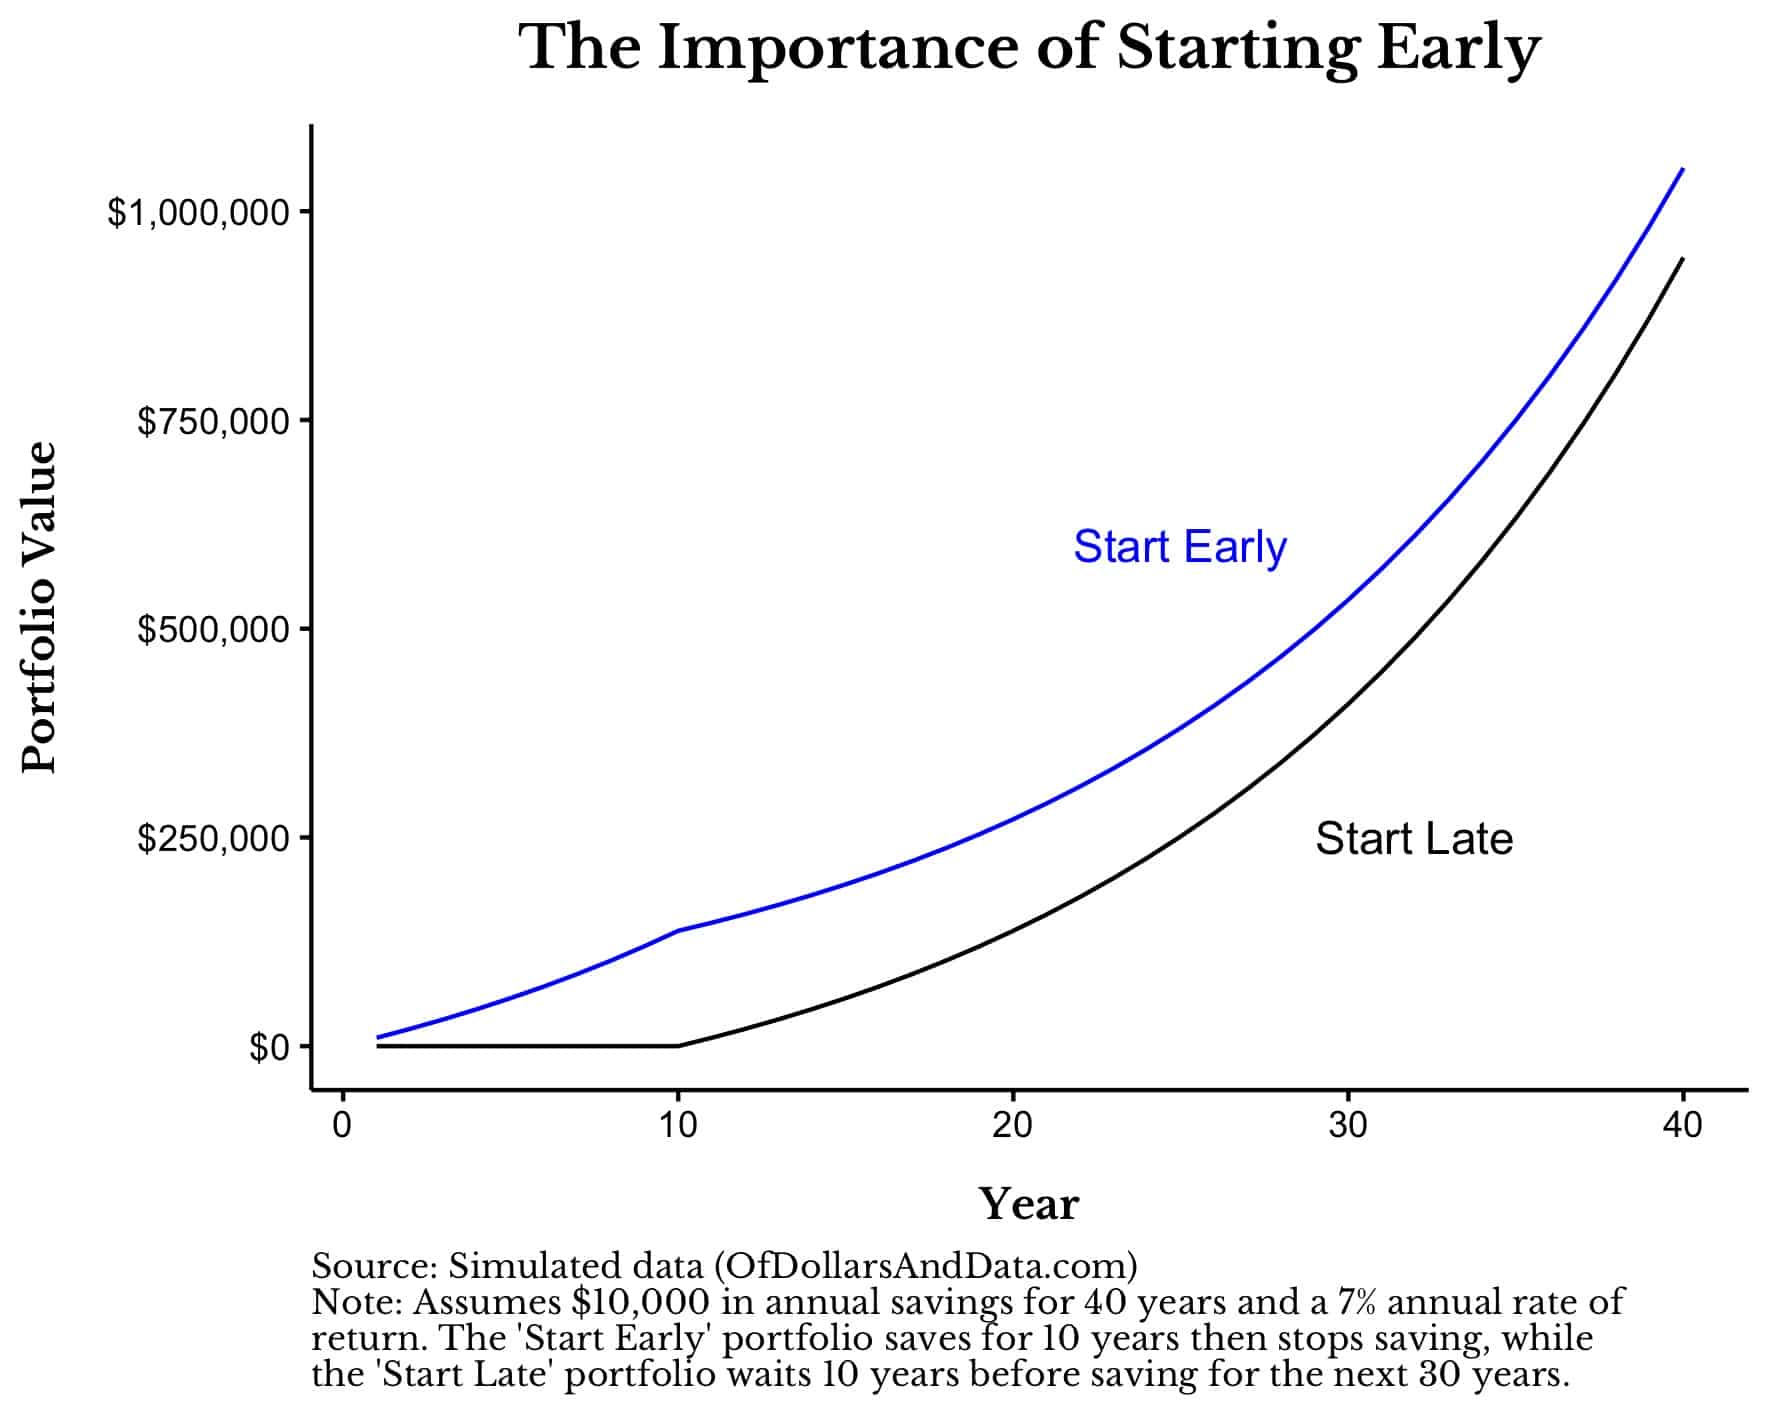 The difference in portfolio value between starting early and starting late